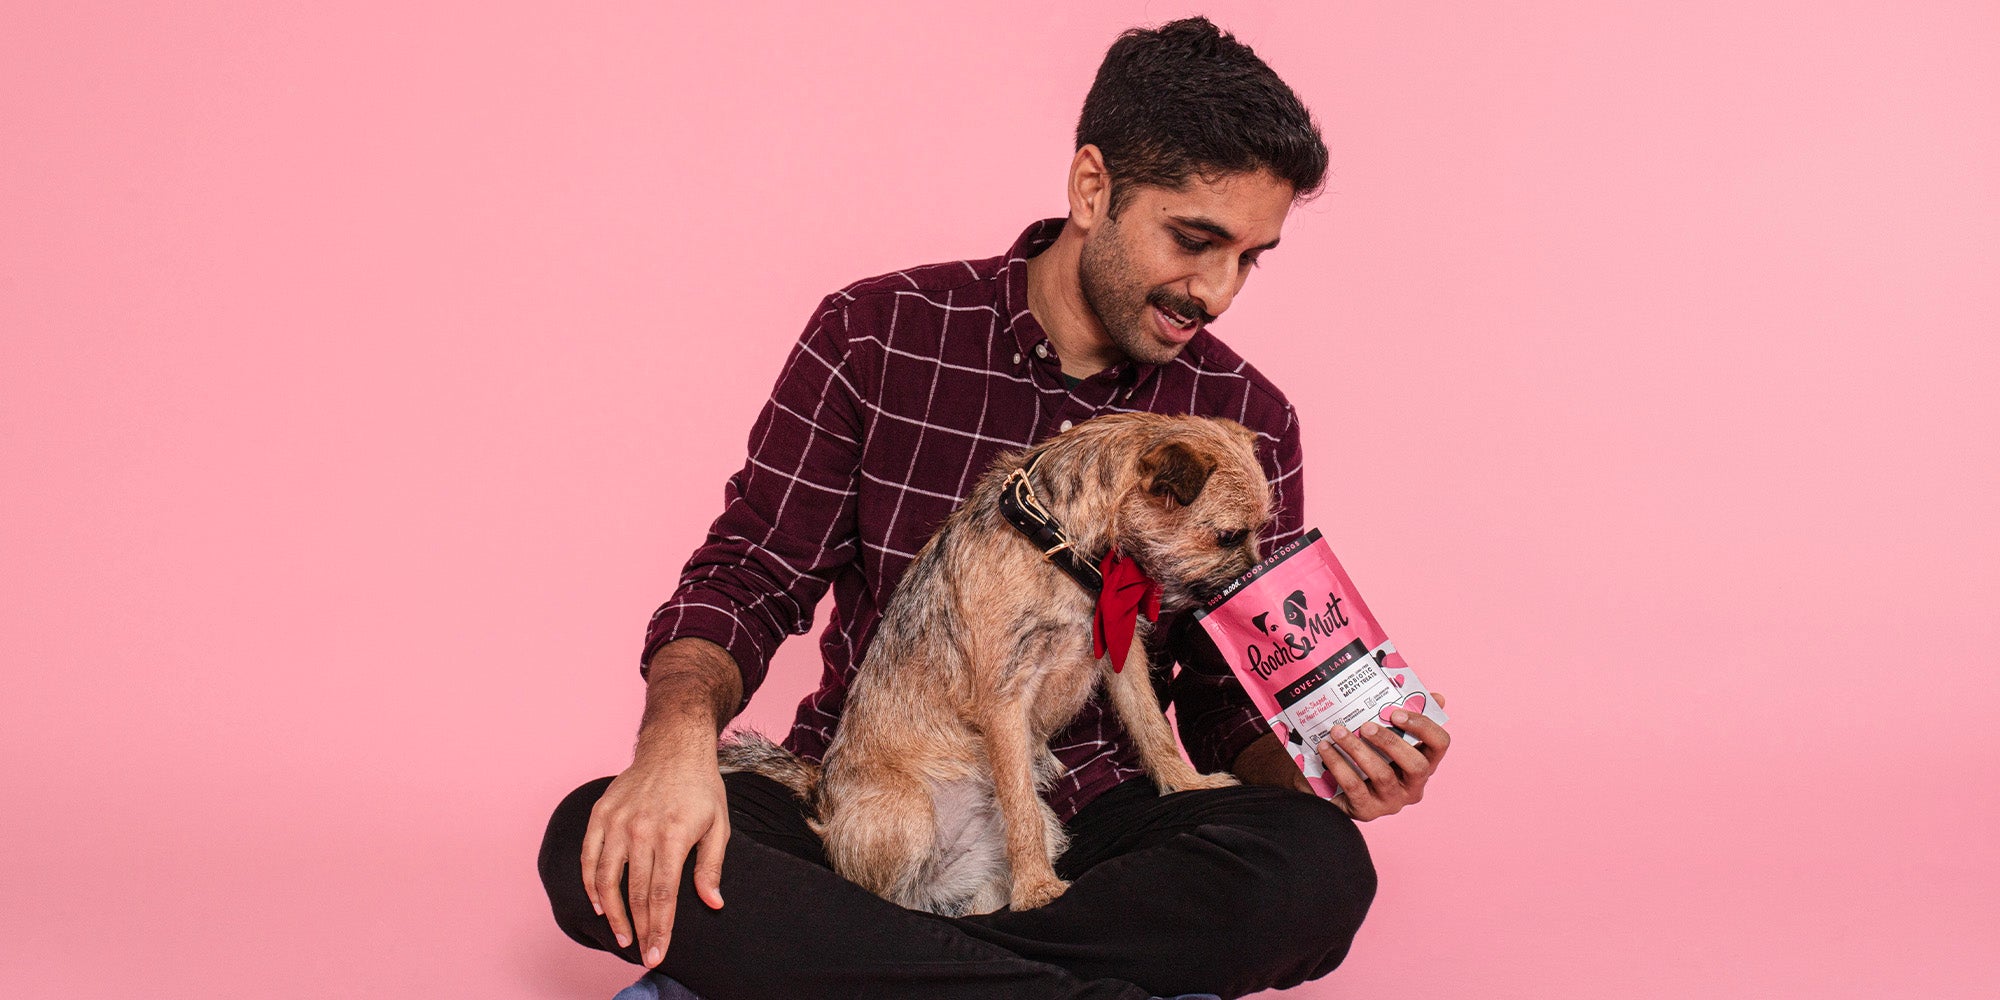 A dark-haired man, feeding his golden coloured dog Pooch & Mutt treats from the bag, against a pale pink background